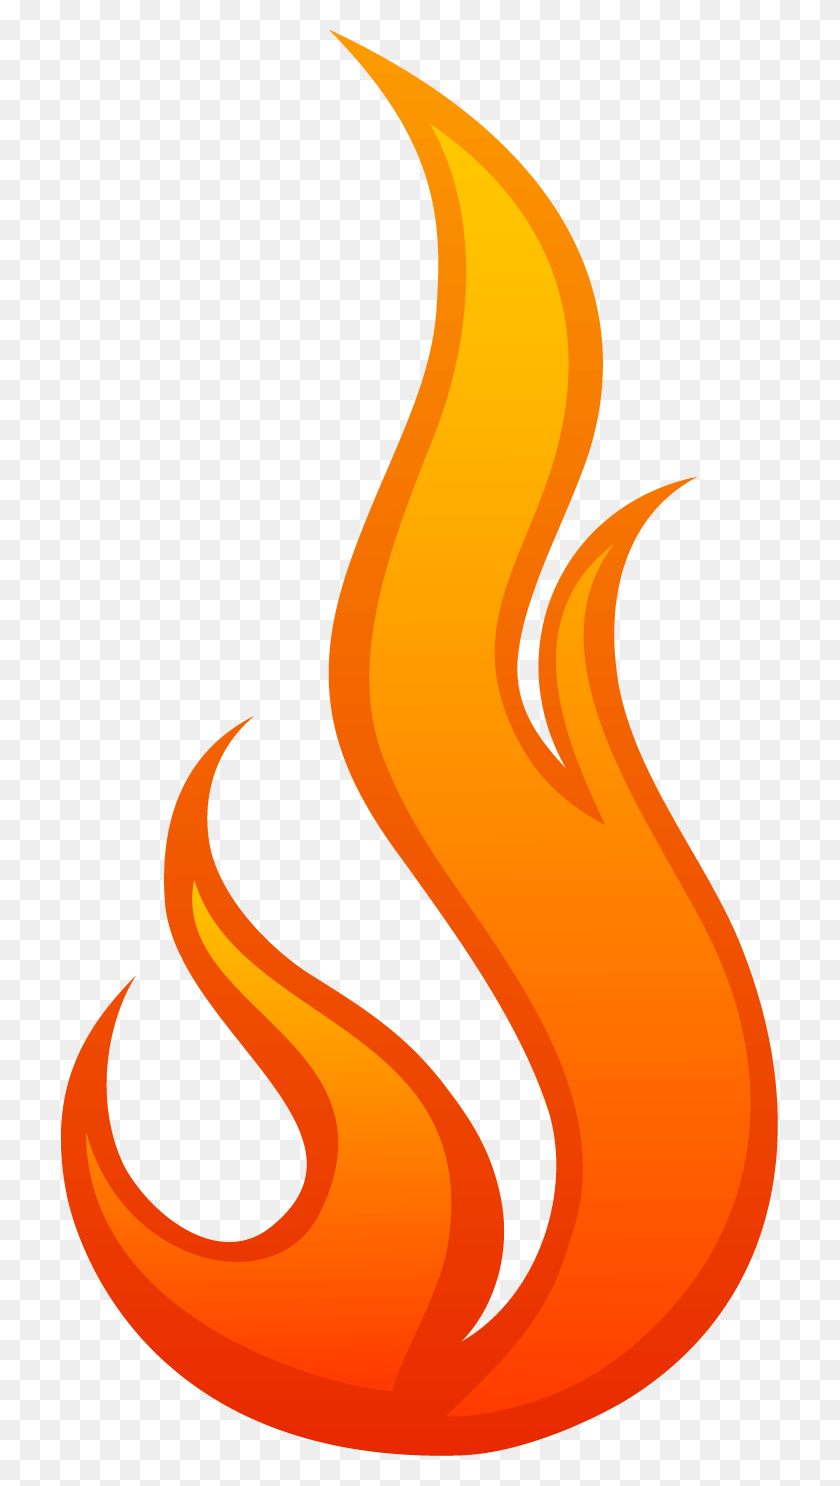 717x1426 Hell Clipart Fire Sparks De Fuego, Flame, Hoguera Hd Png